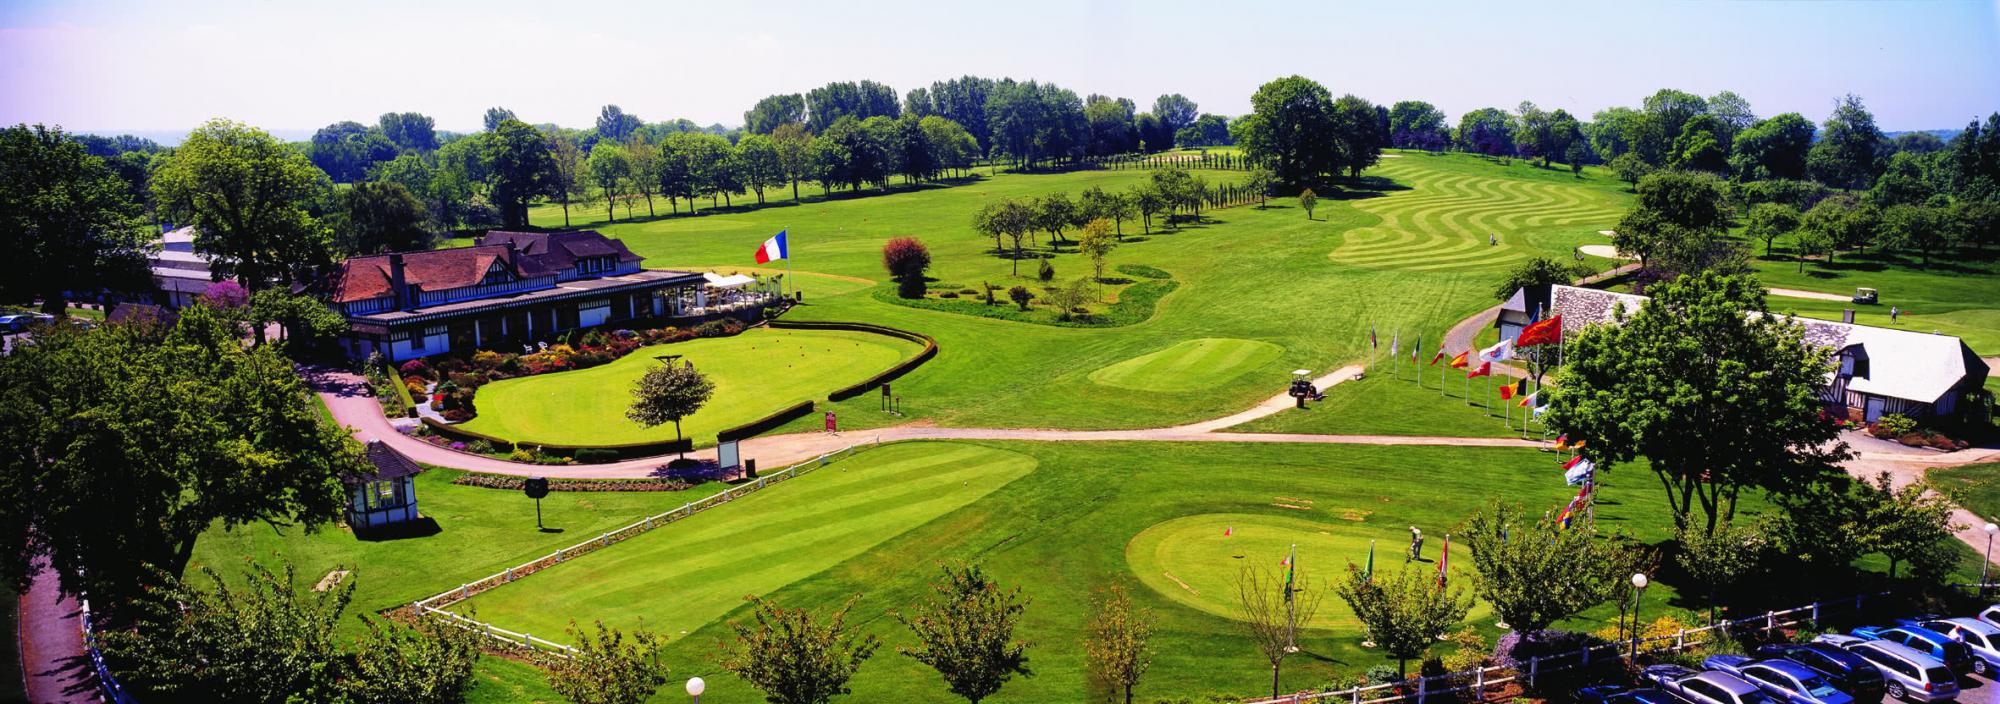 View Golf Barriere de Deauville's beautiful golf course within stunning Normandy.